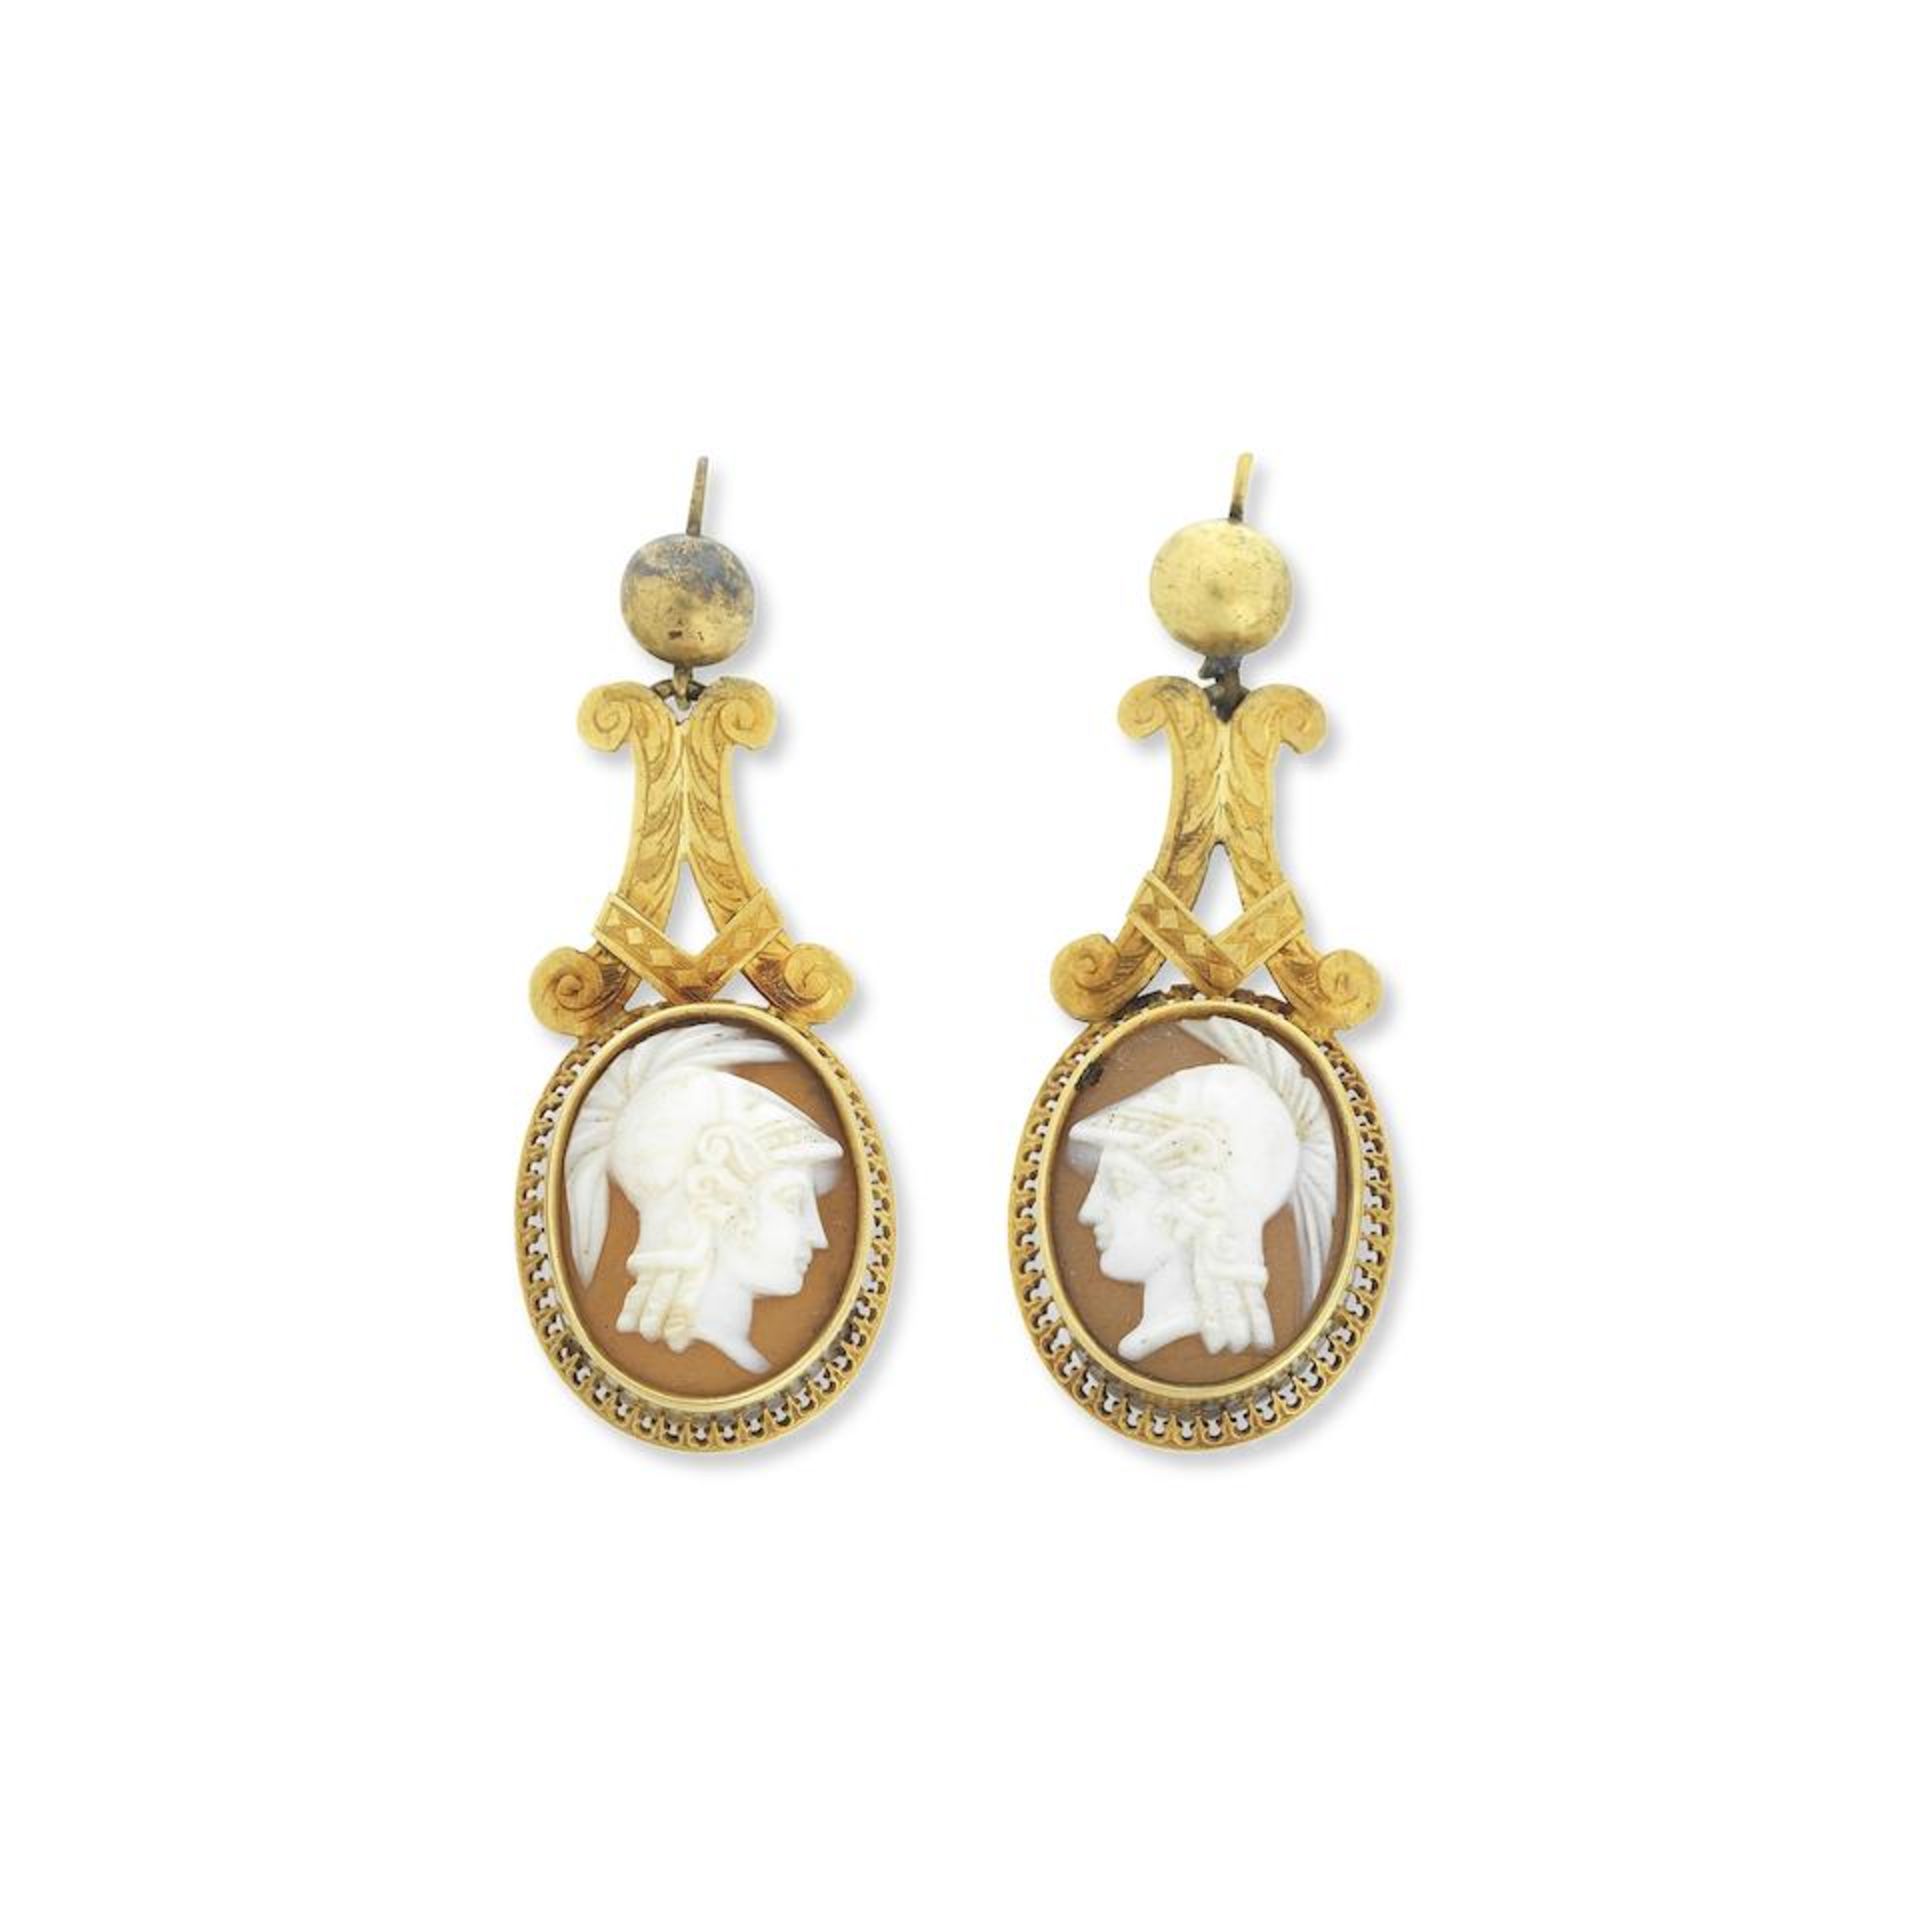 A pair of shell cameo pendent earrings, circa 1870